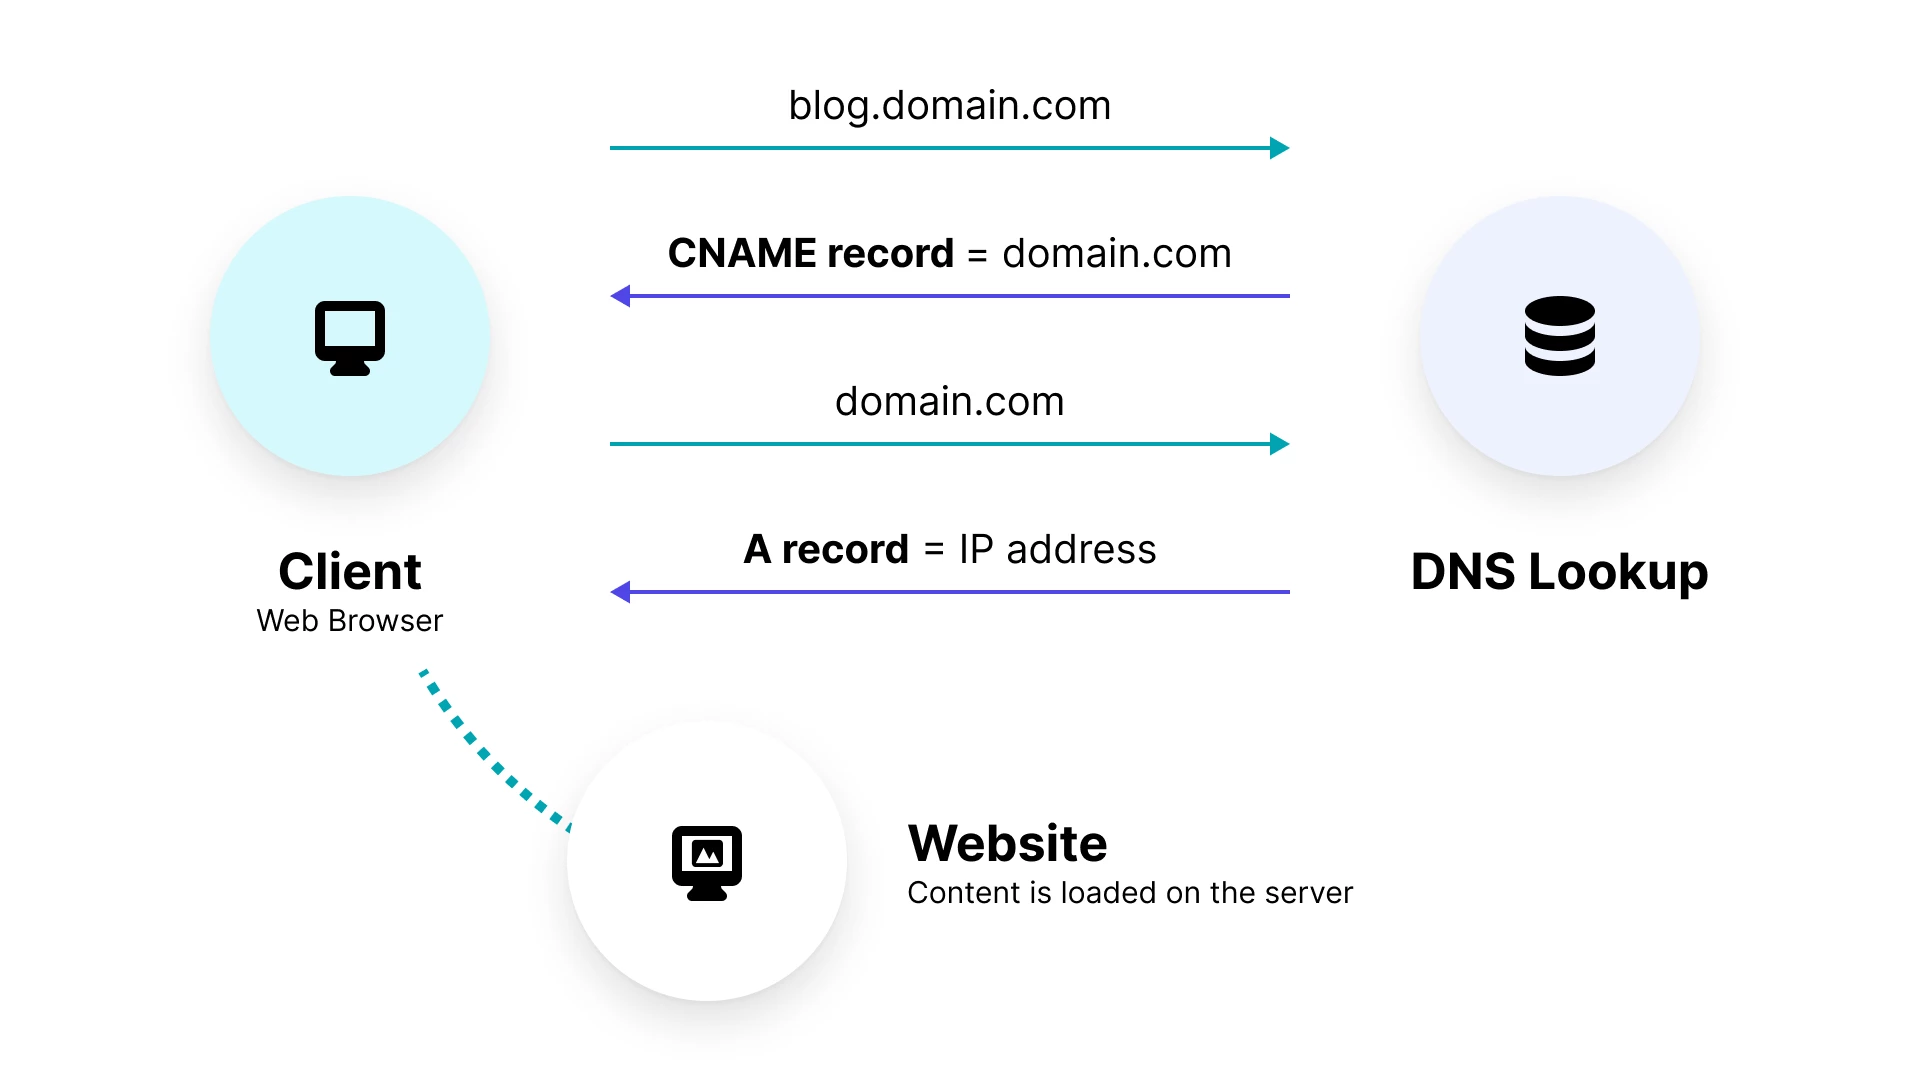 A graphic depicting how a CNAME record works in a DNS lookup.